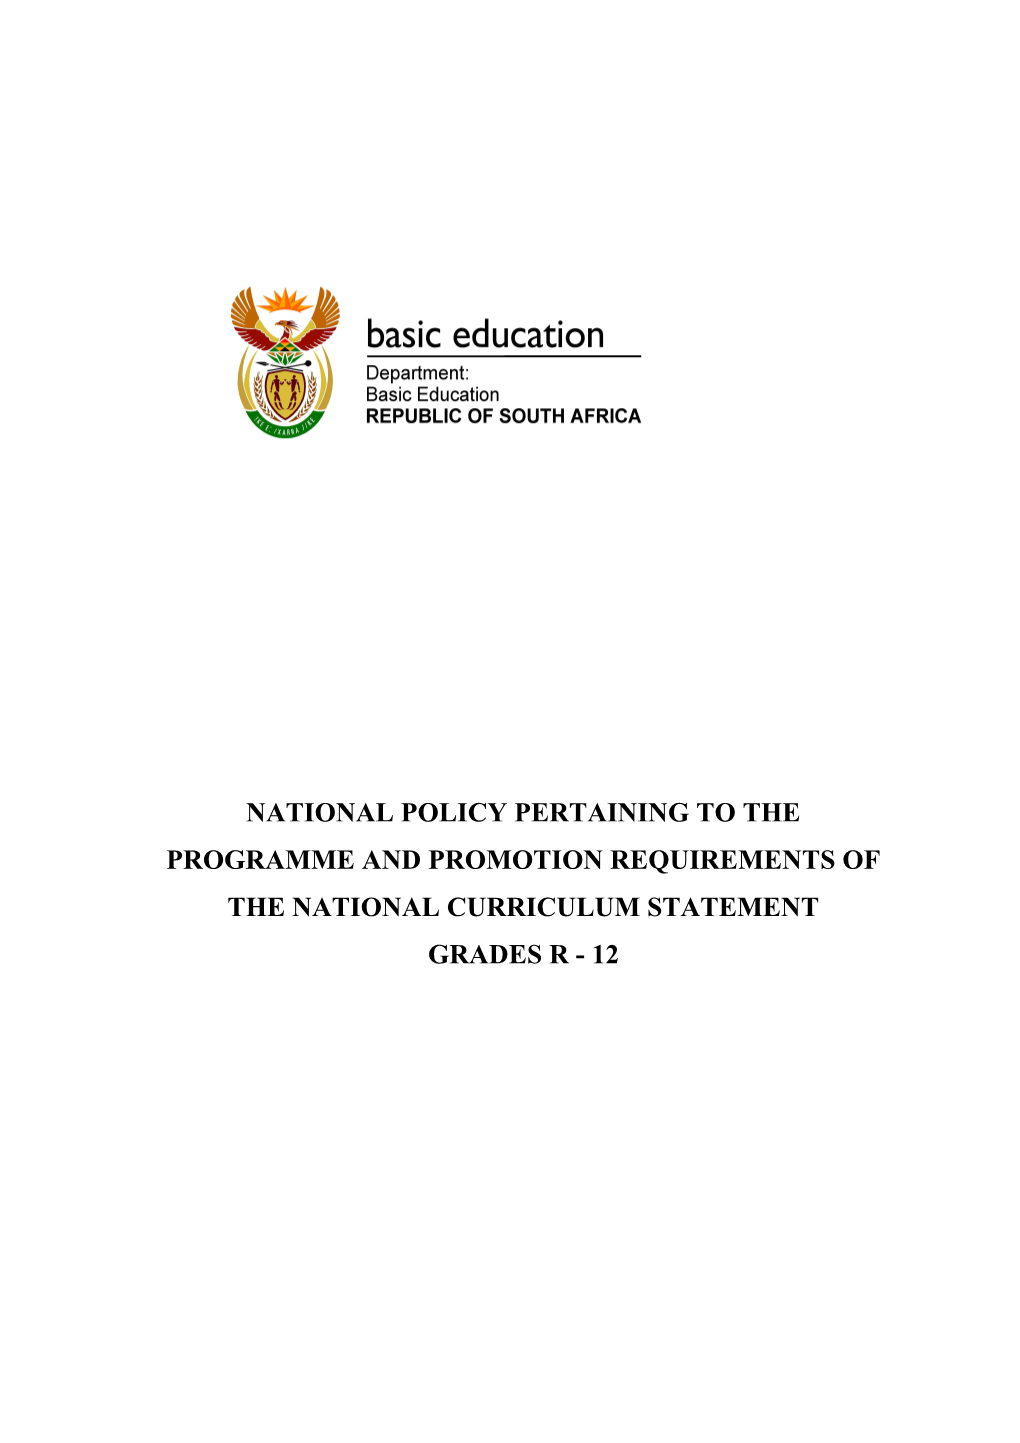 National Policy Pertaining to the Programme and Promotion Requirements of the National